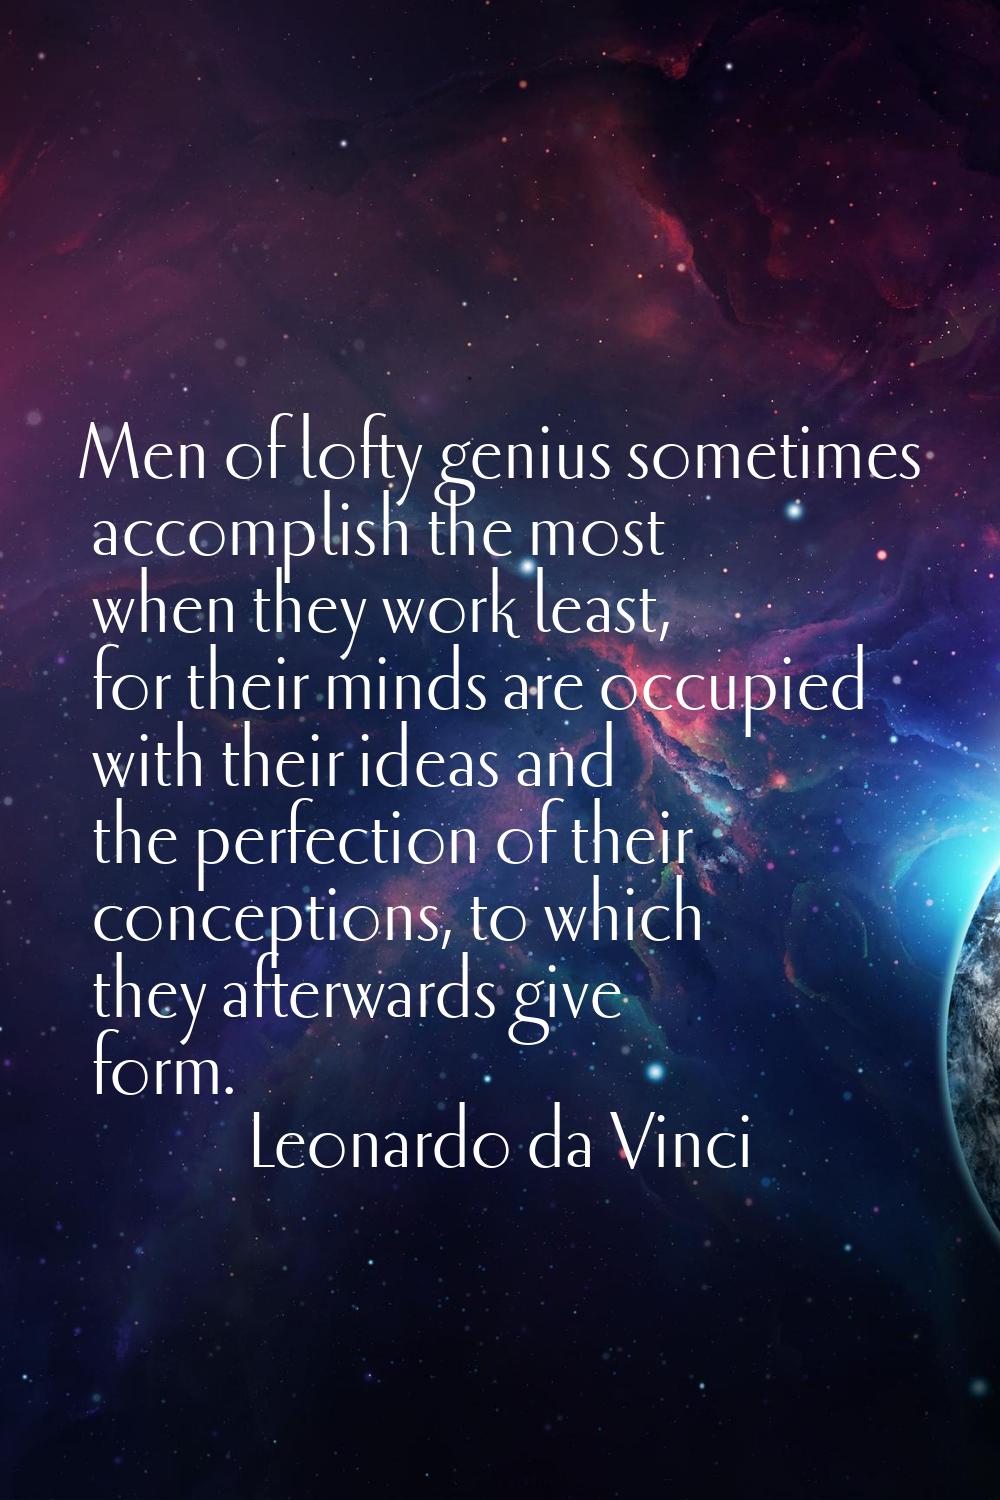 Men of lofty genius sometimes accomplish the most when they work least, for their minds are occupie